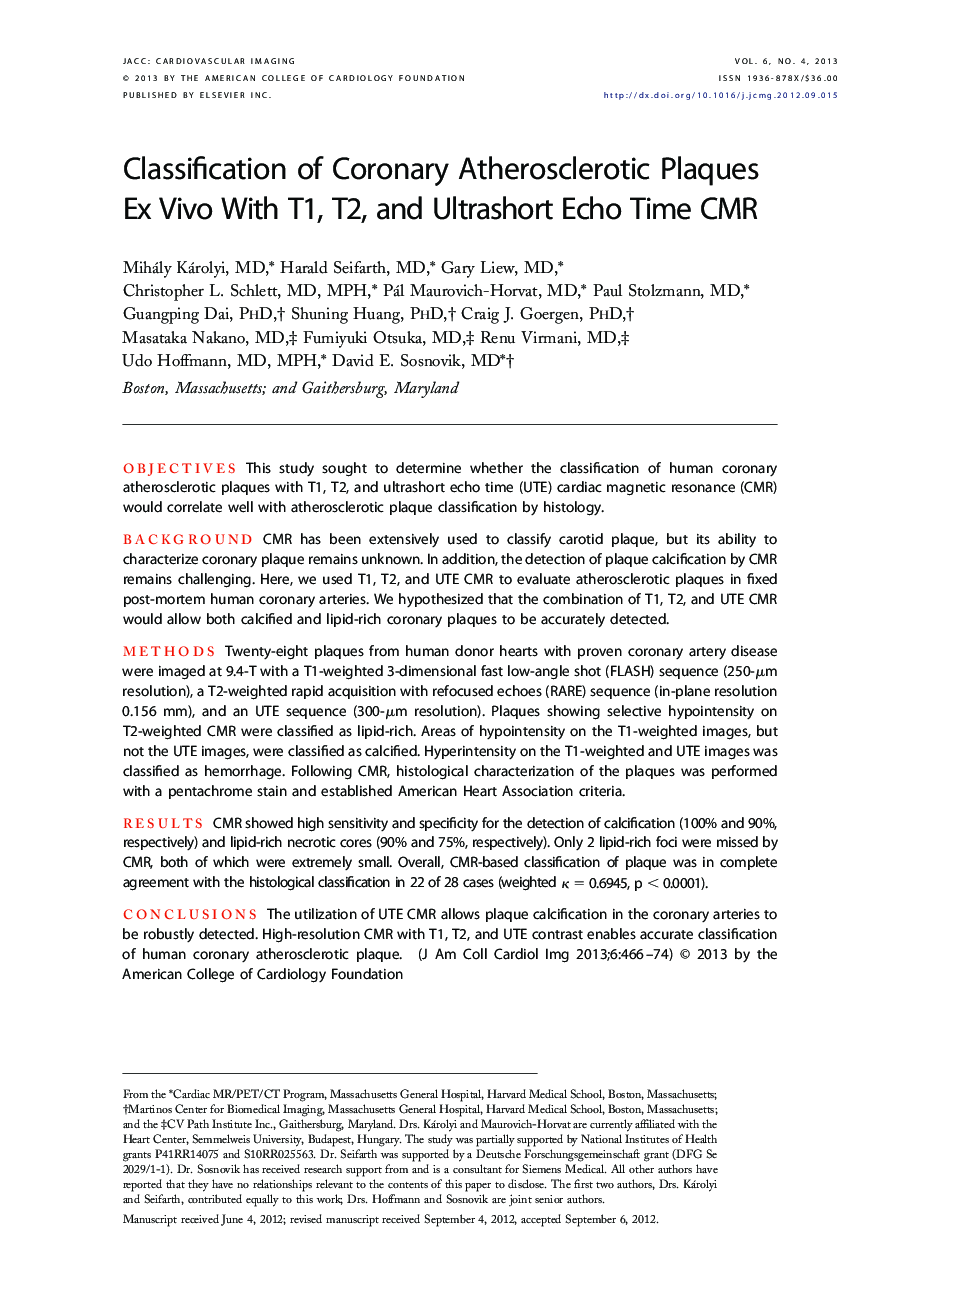 Classification of Coronary Atherosclerotic Plaques Ex Vivo With T1, T2, and Ultrashort Echo Time CMR 